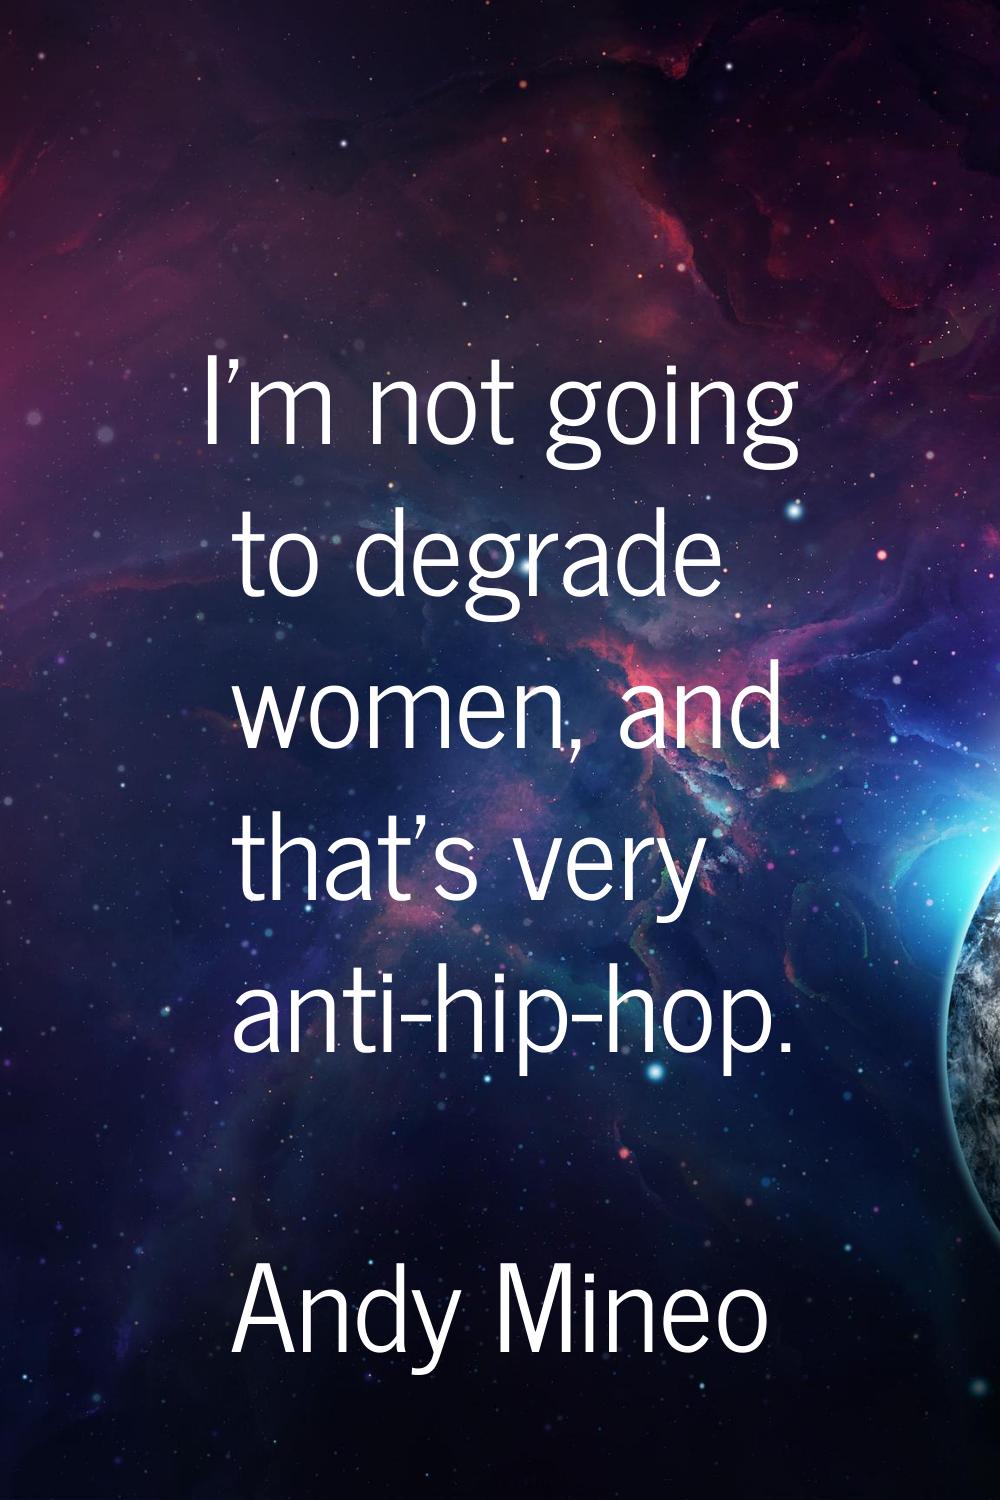 I'm not going to degrade women, and that's very anti-hip-hop.